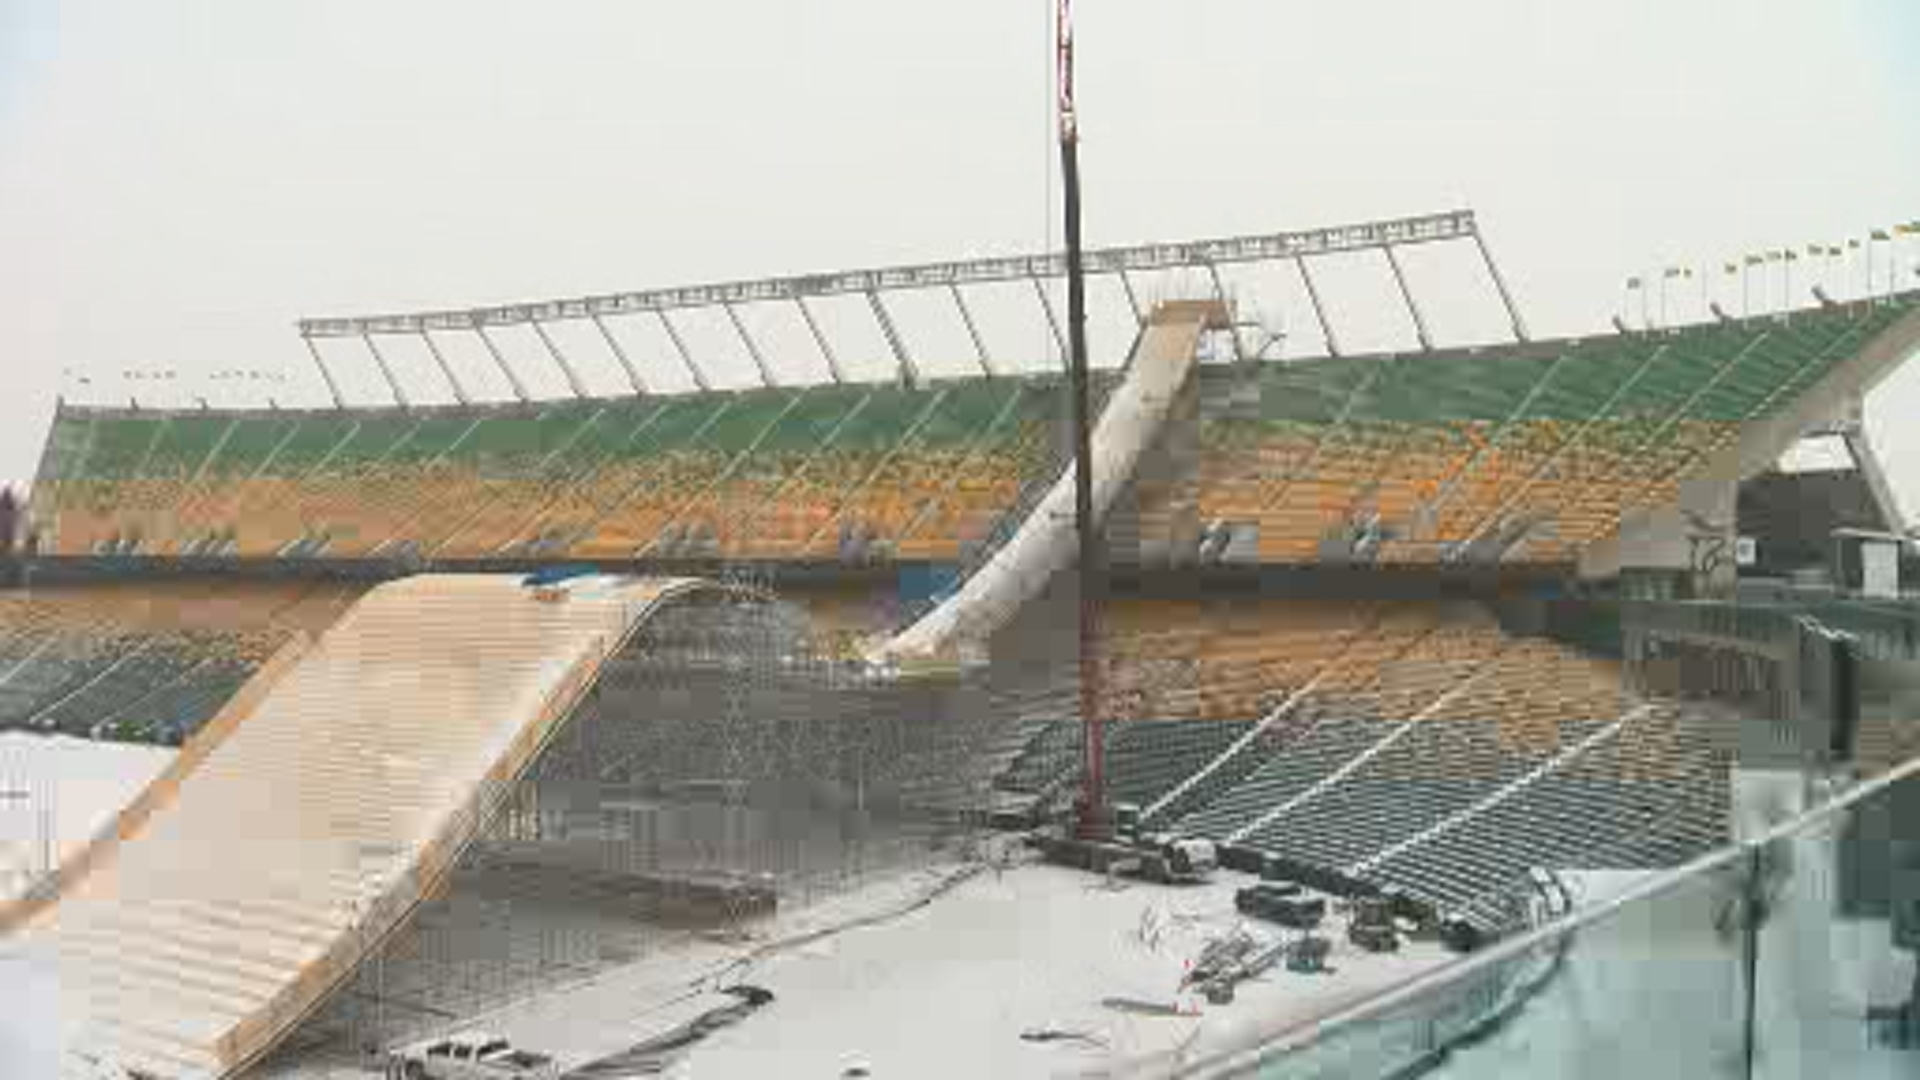 First-of-its kind jump built for snowboarding World Cup stop in Edmonton